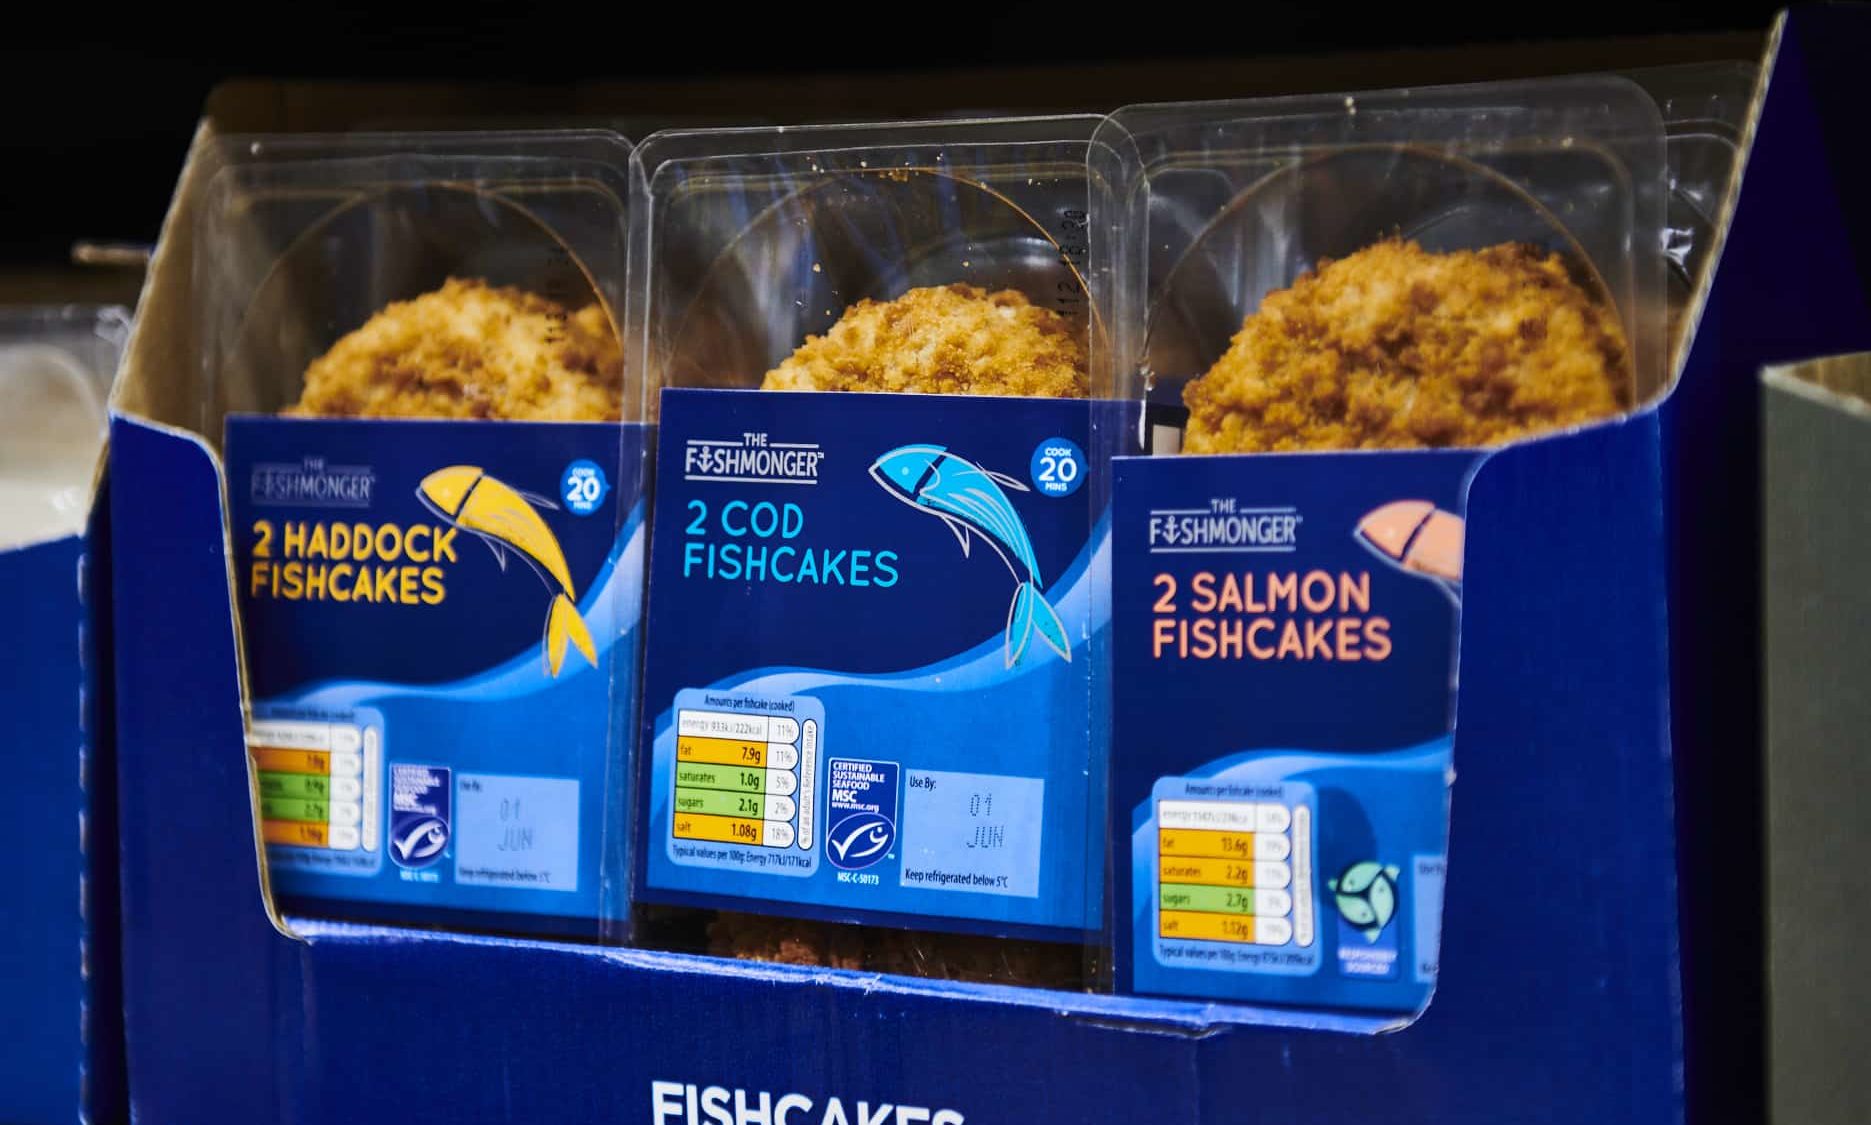 Aldi introduces packaging made from recycled plastic